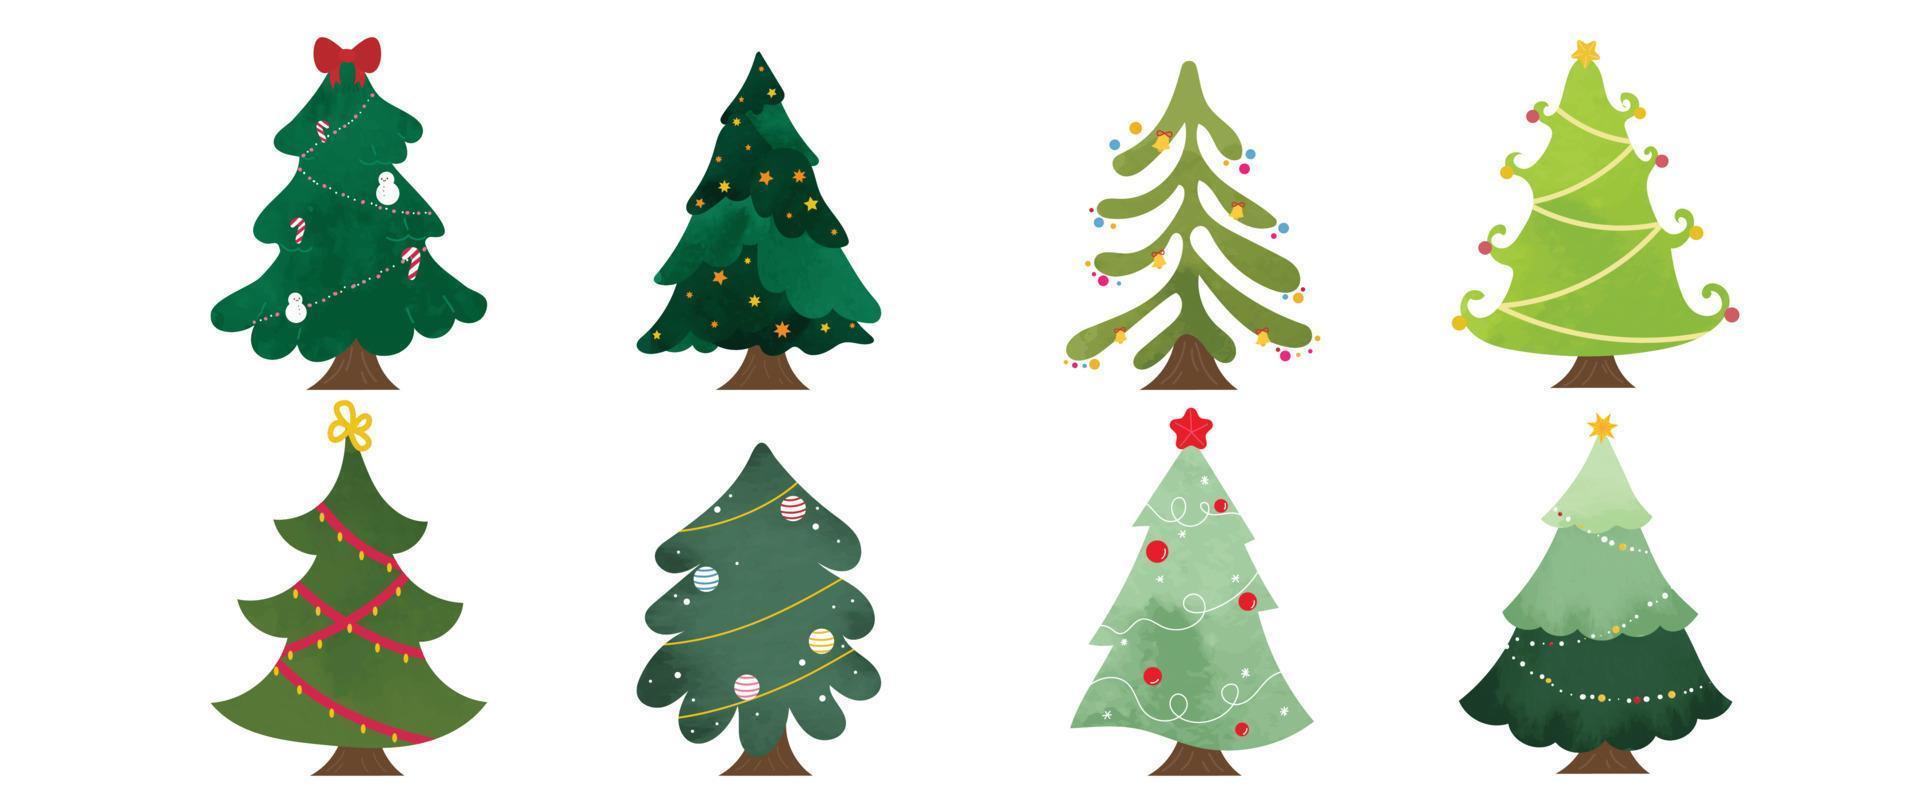 Set of watercolor christmas tree vector illustration. Collection of hand drawn cute decorative christmas trees isolated on white background. Design for sticker, decoration, card, poster, artwork.